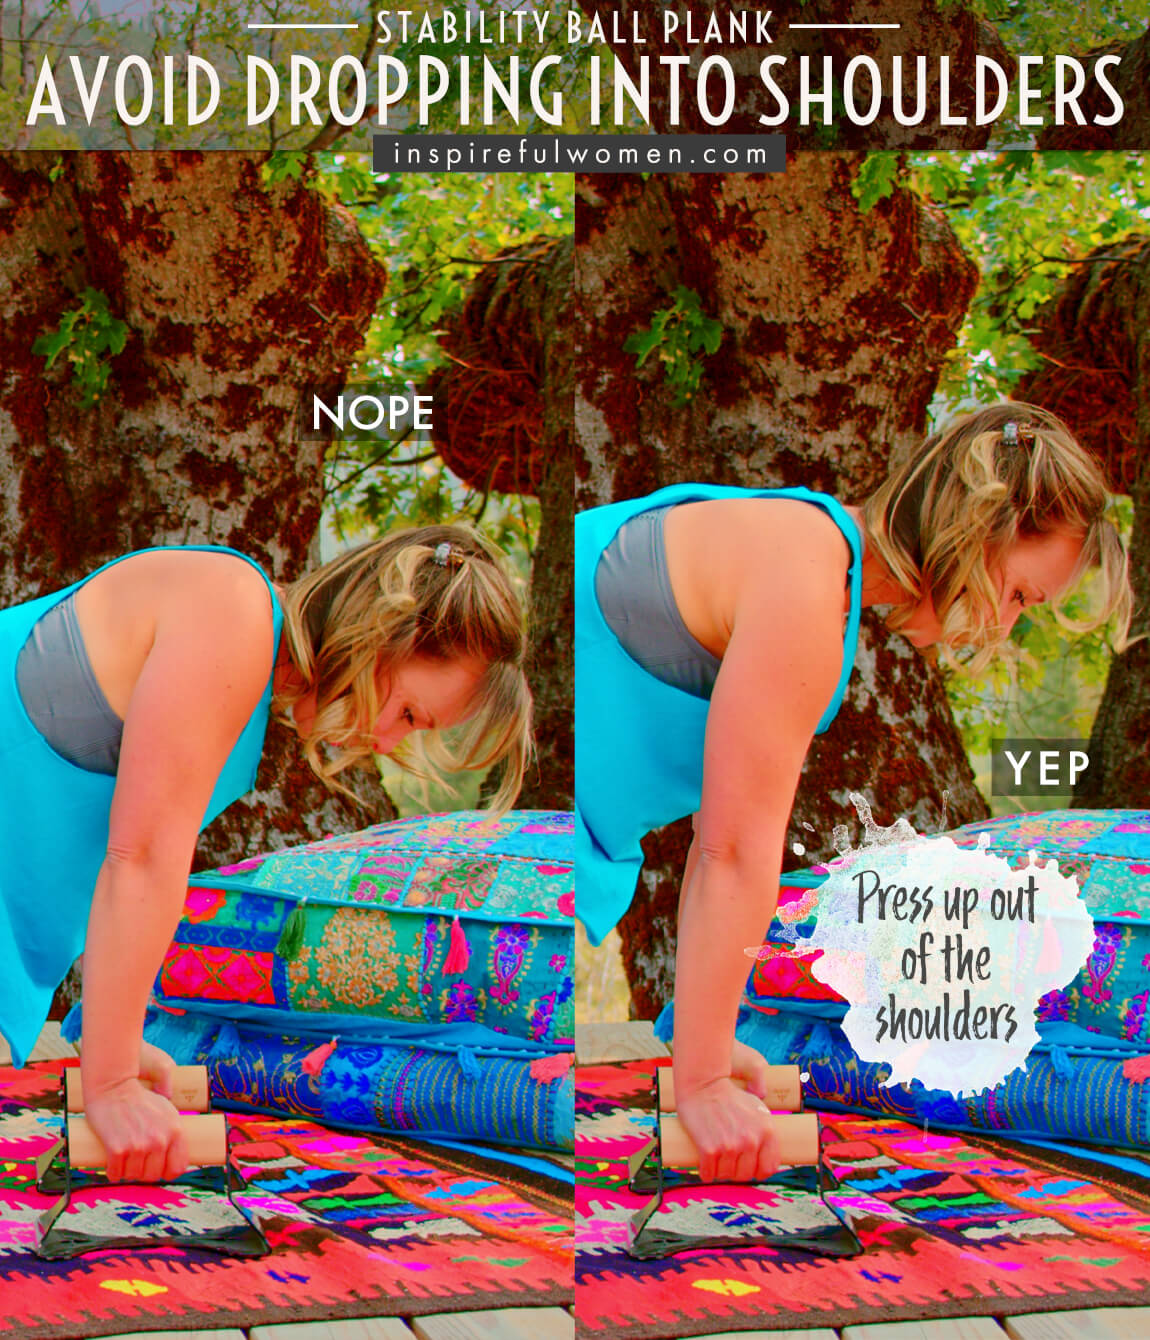 avoid-dropping-into-shoulders-stability-ball-plank-prone-neutral-spine-core-exercise-proper-form